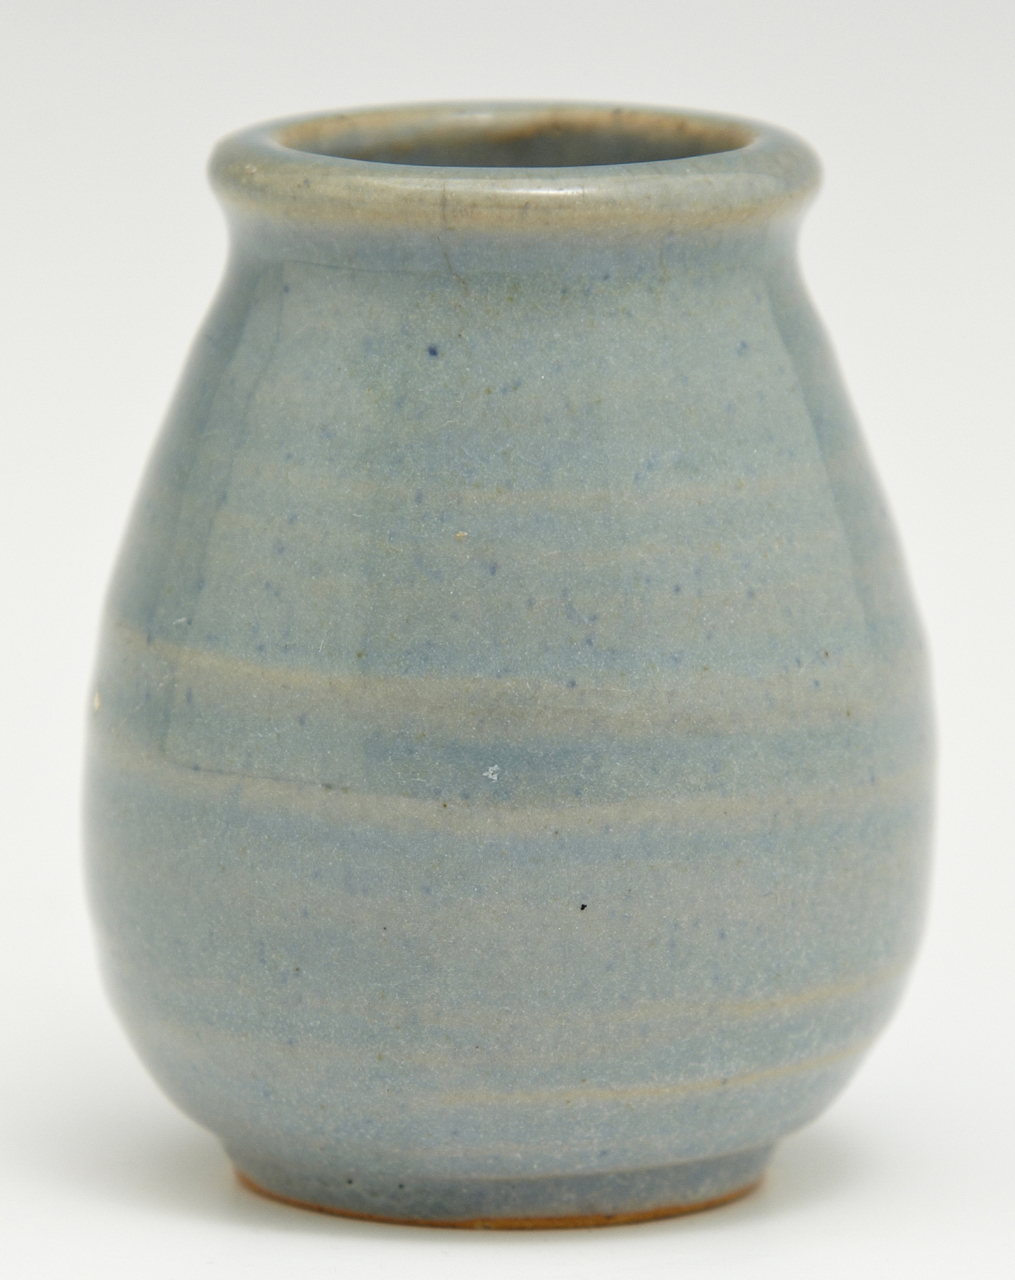 blue vase with a thin, striped pattern on the side